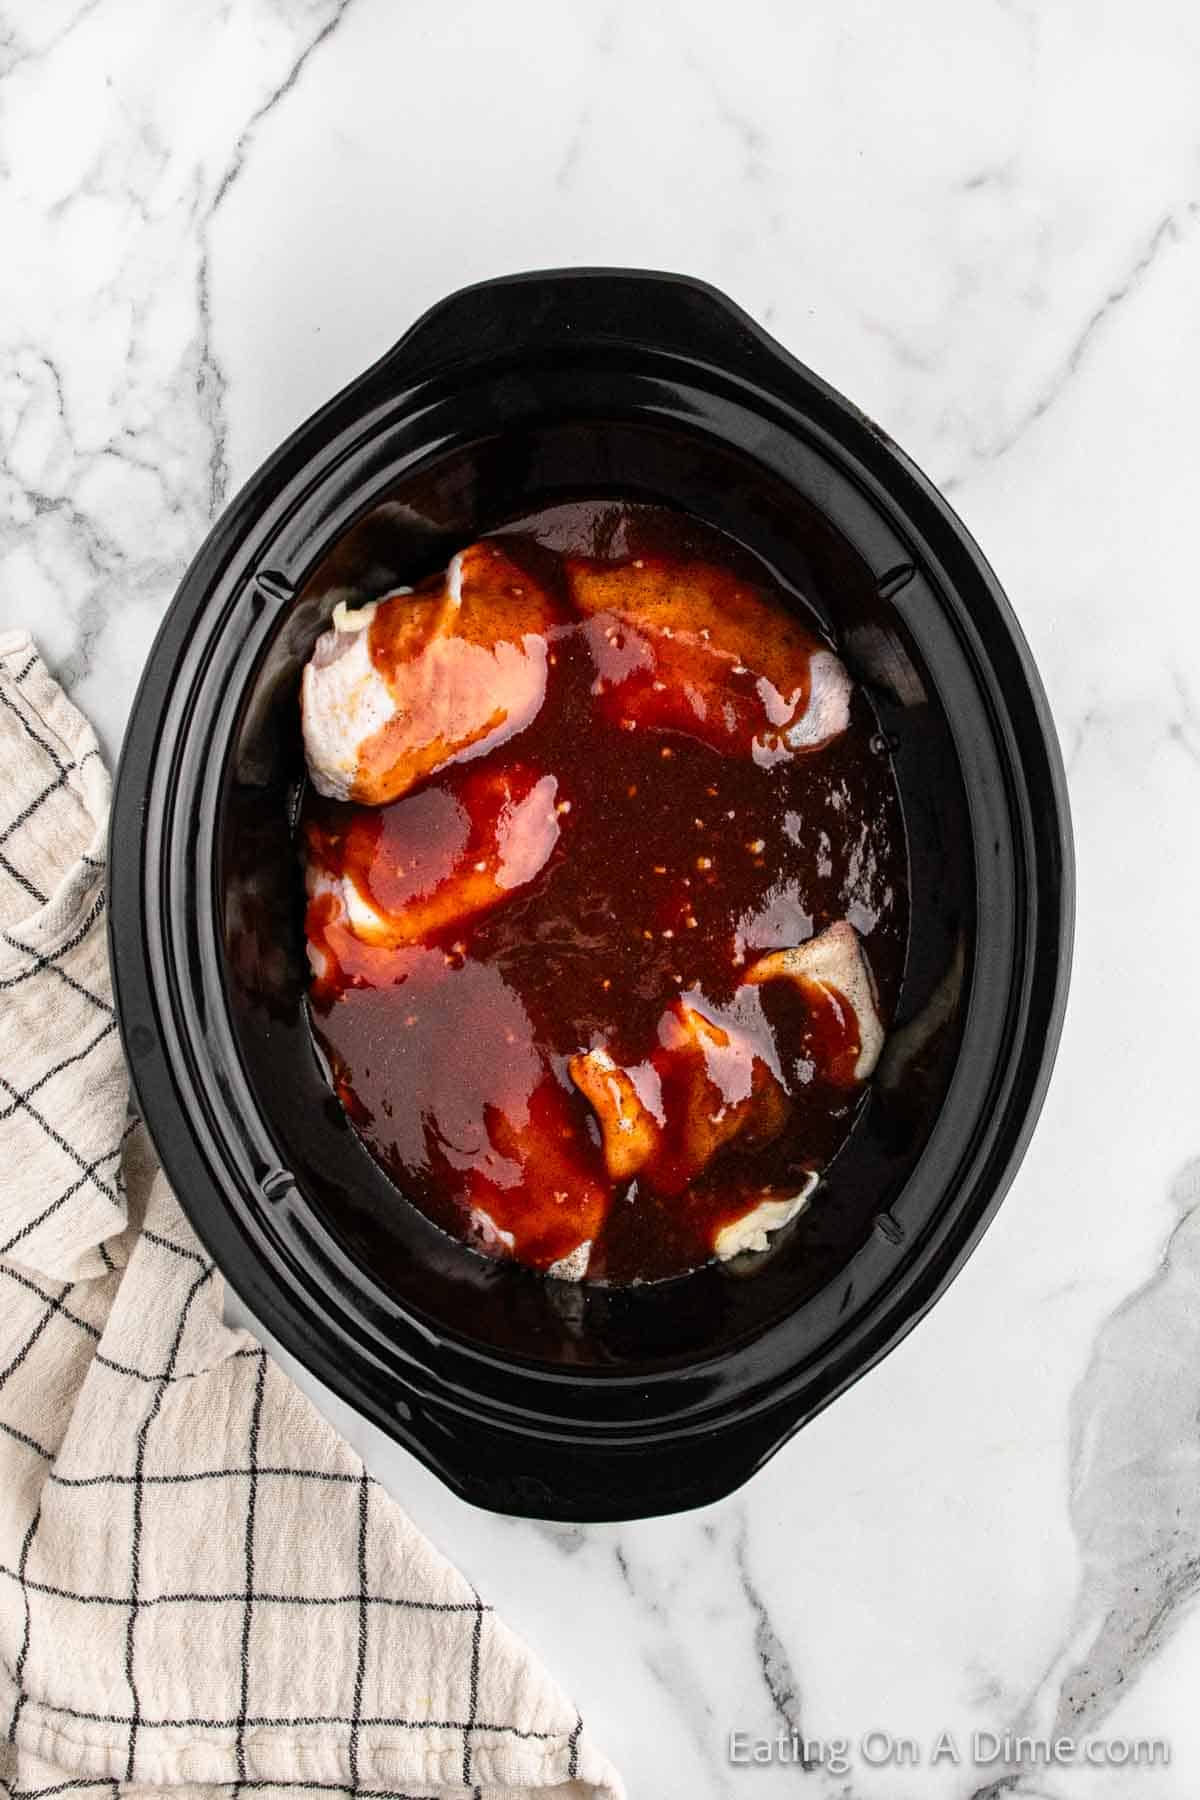 Topping the sauce with the chicken thighs in the slow cooker